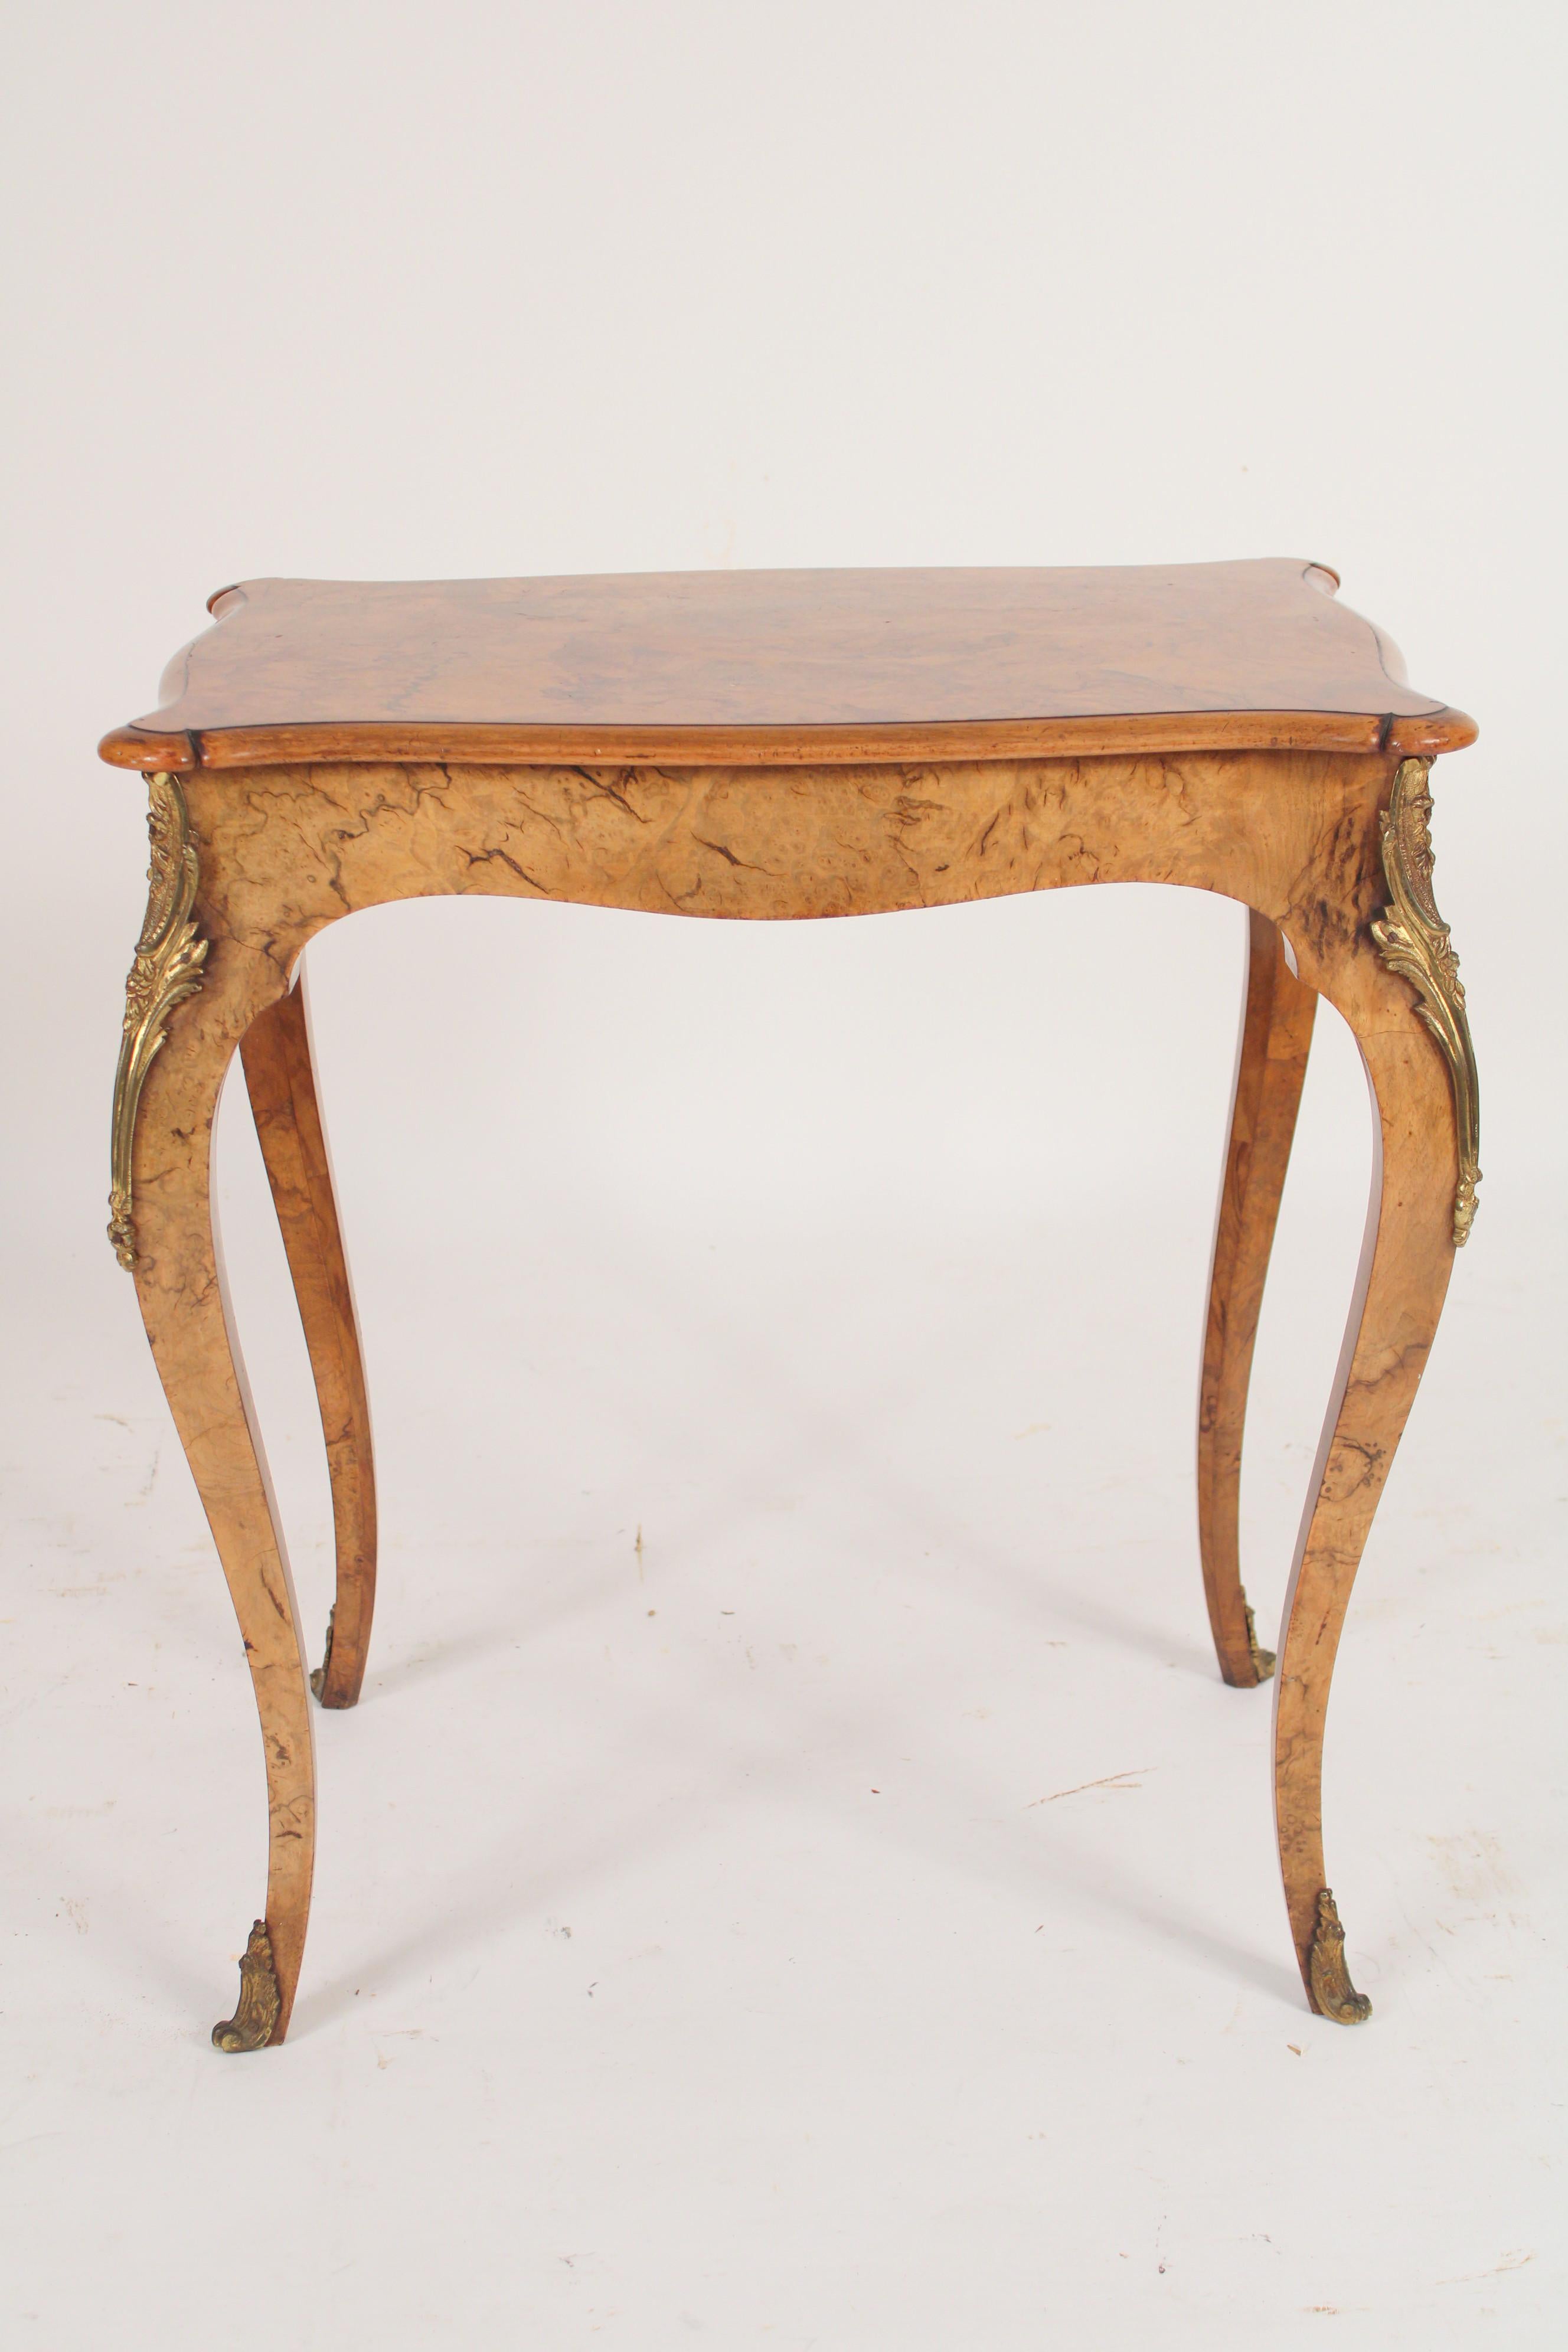 English Louis XV style burl walnut occasional table with chased brass mounts, circa 1910. Rectangular shaped top with serpentine shaped borders, serpentine shaped friezes, resting on burl walnut legs with chased brass mounts. Very nice quality burl